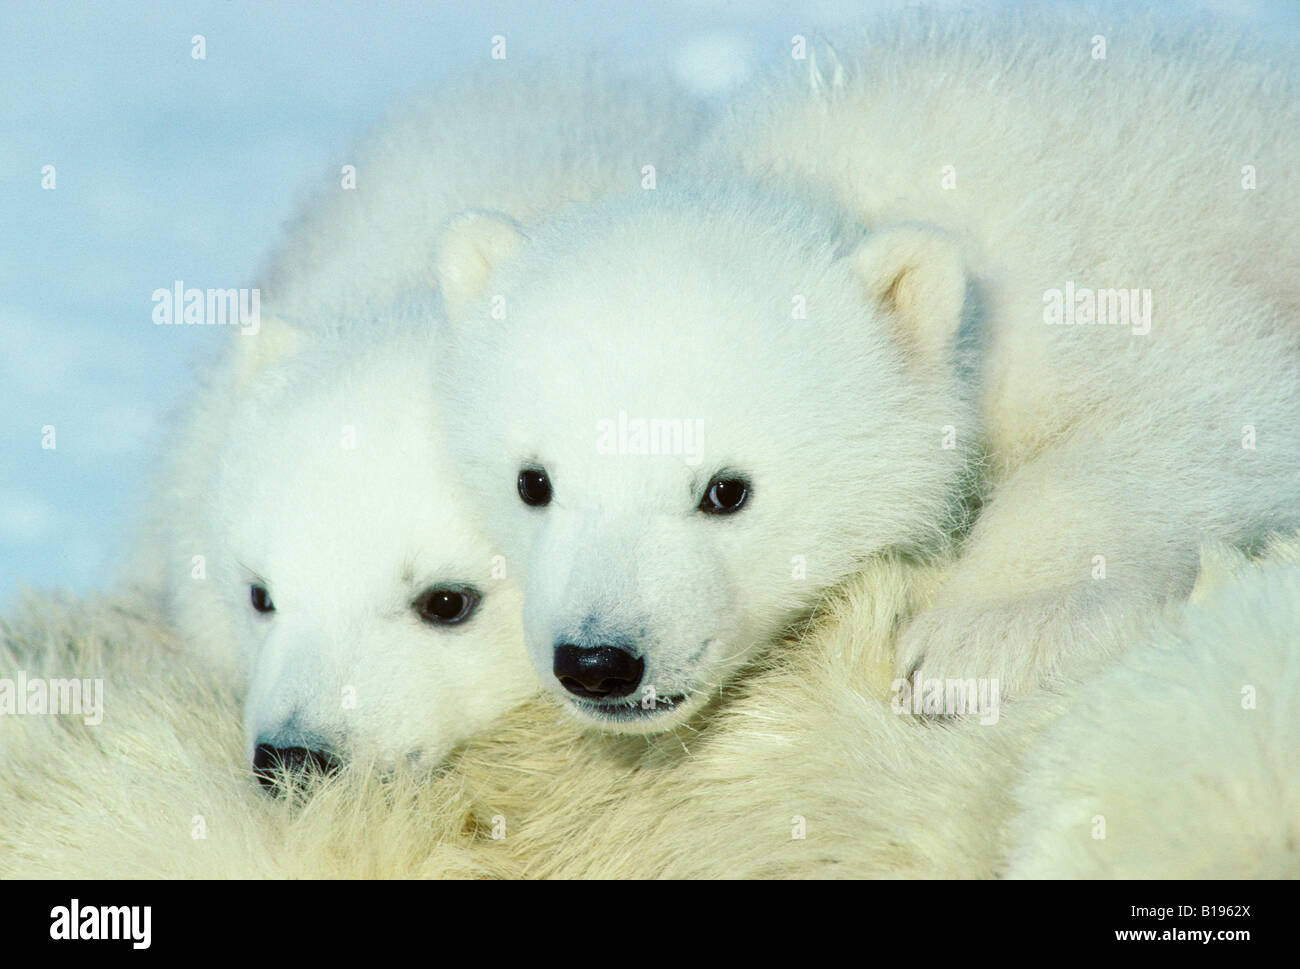 Three-month old polar bear cubs (Ursus maritimus) resting on their mother, Arctic Canada. Stock Photo